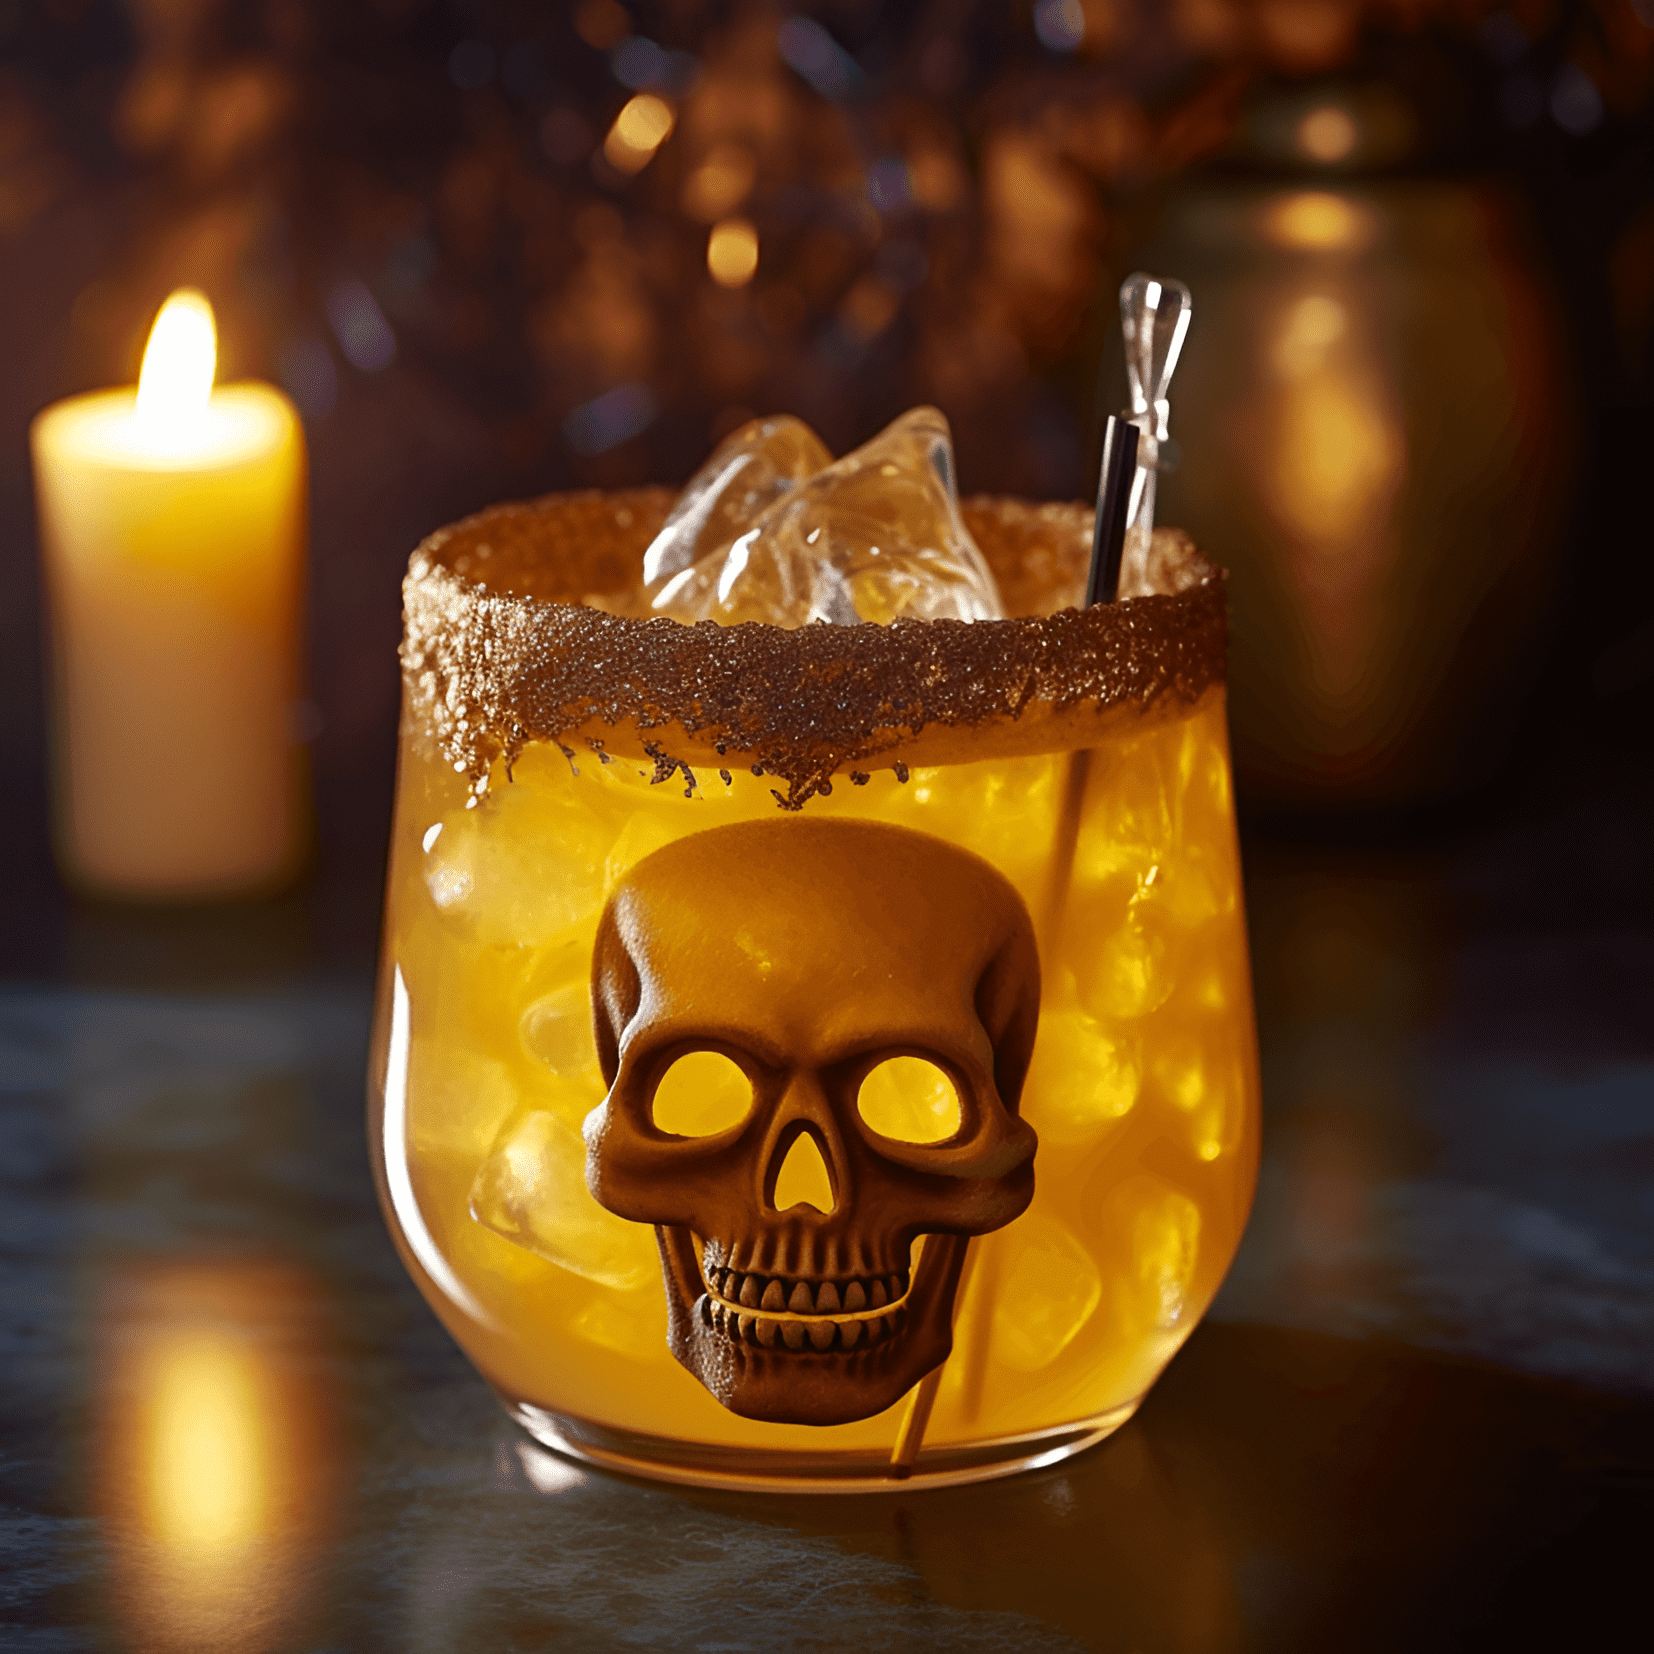 Voodoo Doll Cocktail Recipe - The Voodoo Doll is a complex and intriguing cocktail, with a perfect balance of sweet, sour, and spicy flavors. The combination of rum, pineapple juice, and lime juice creates a refreshing and tropical base, while the addition of ginger and cinnamon adds warmth and depth. The drink is finished with a dash of bitters, which adds a subtle bitterness and ties all the flavors together.